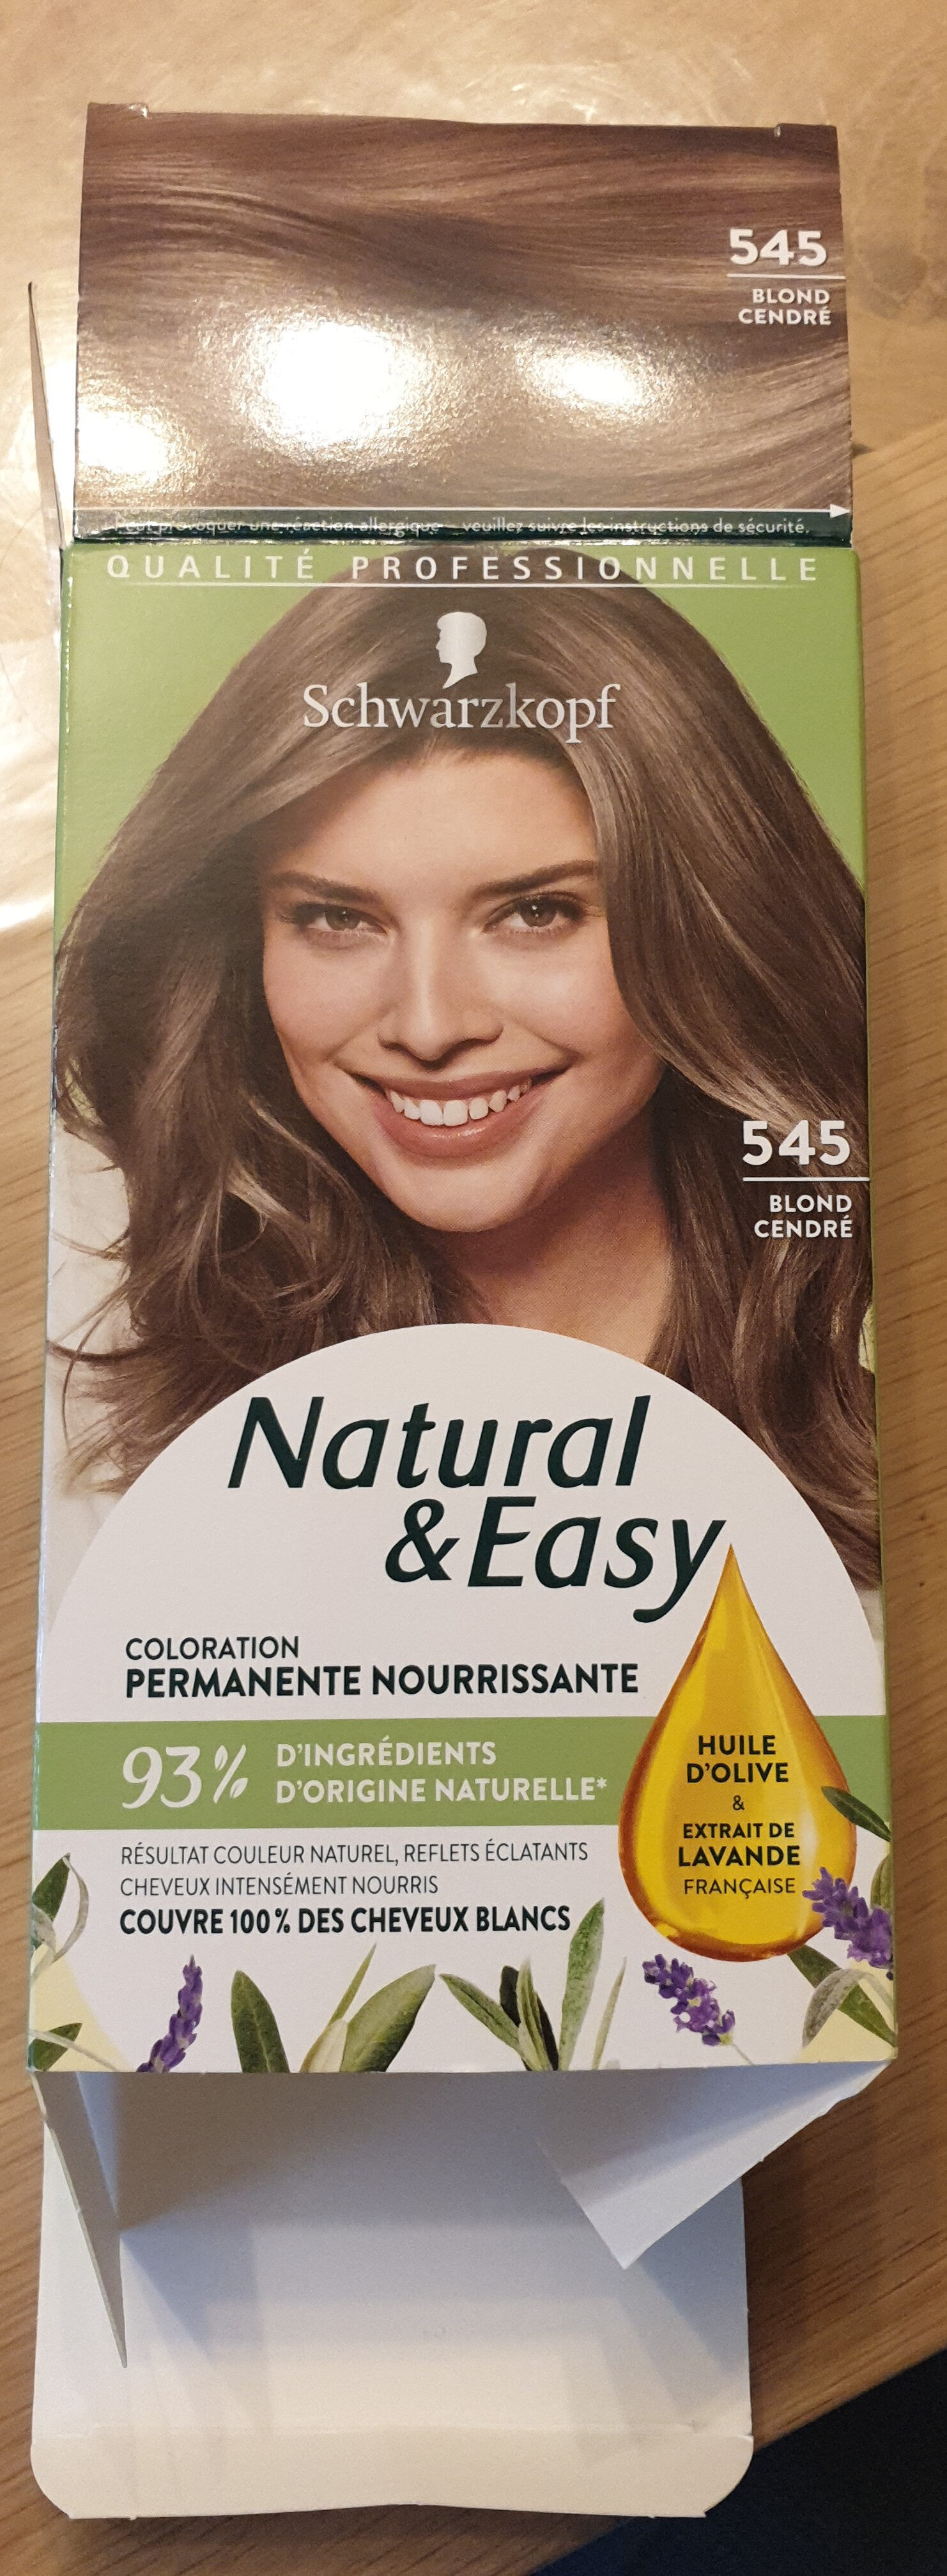 Natural & Easy 545 blond cendré - Tuote - fr